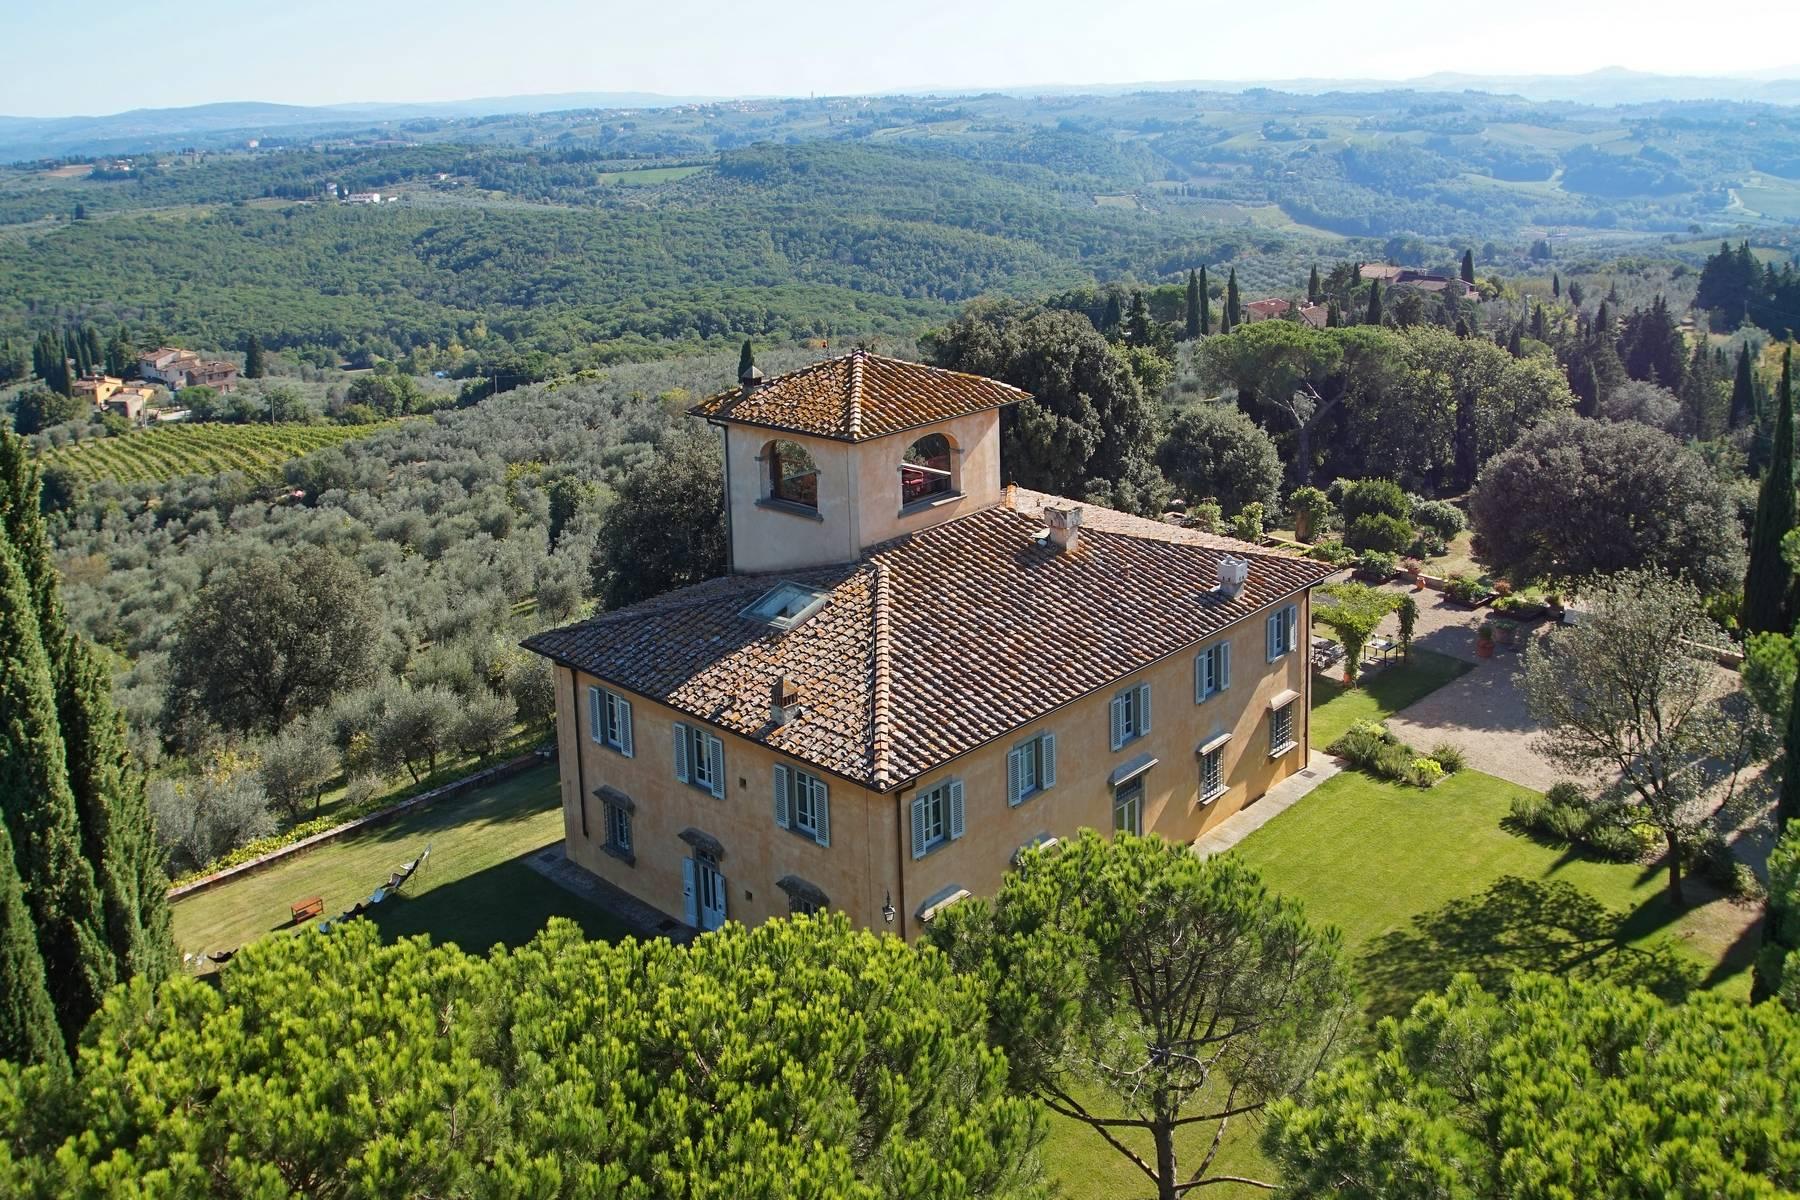 Villa Perle, a classic Tuscan villa surrounded by vineyards and olive groves - 1